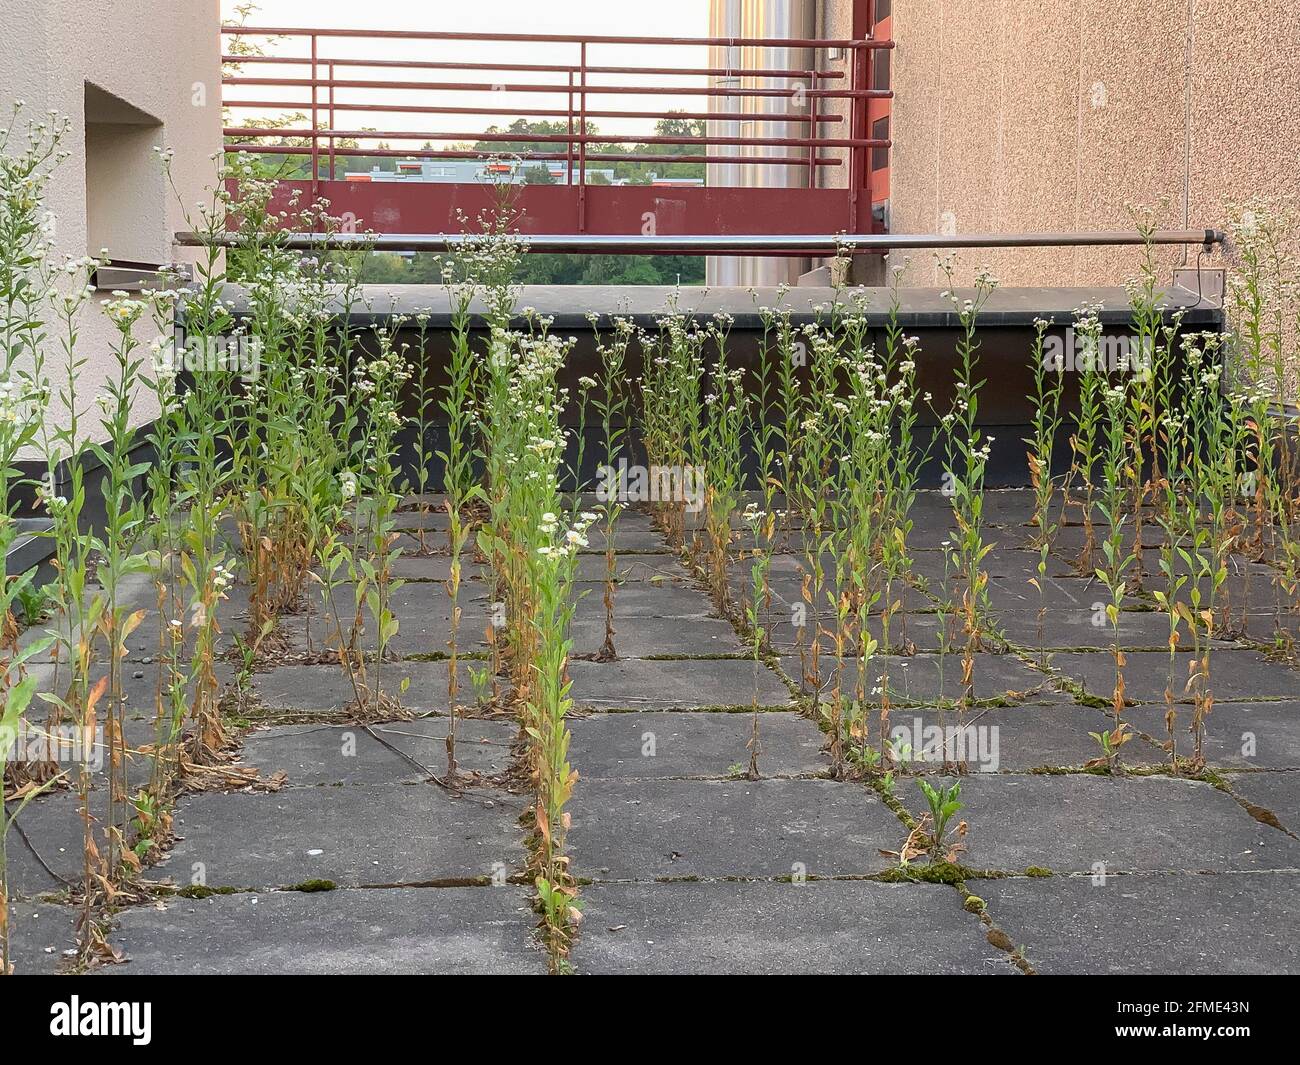 Zurich, Switzerland - June 26, 2019: Tall weeds on the roof terrace of the building Stock Photo